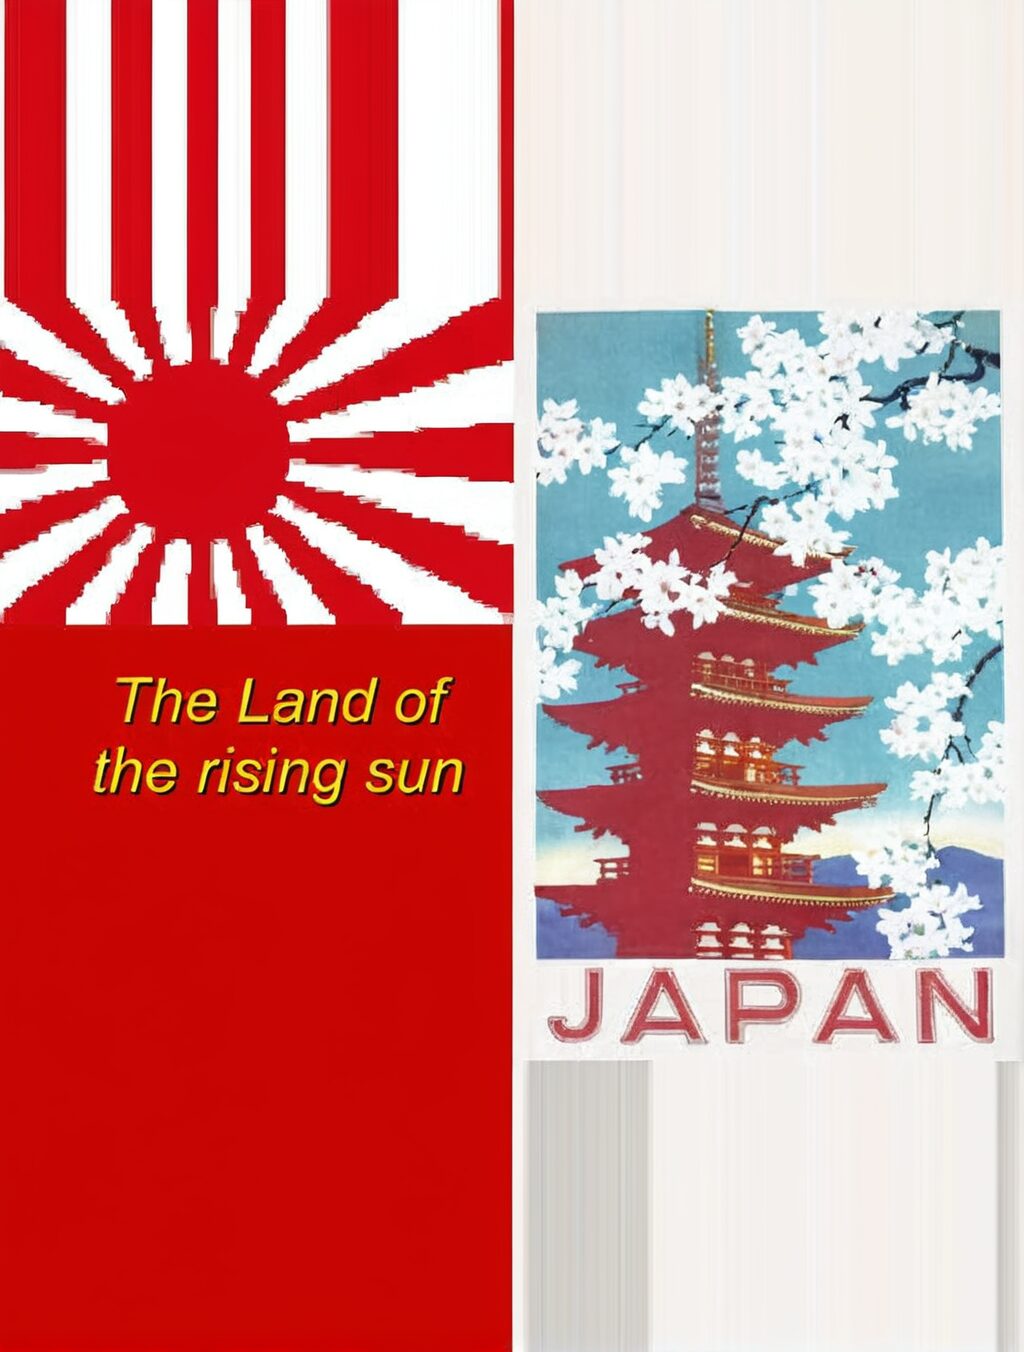 japan land of the rising sun meaning